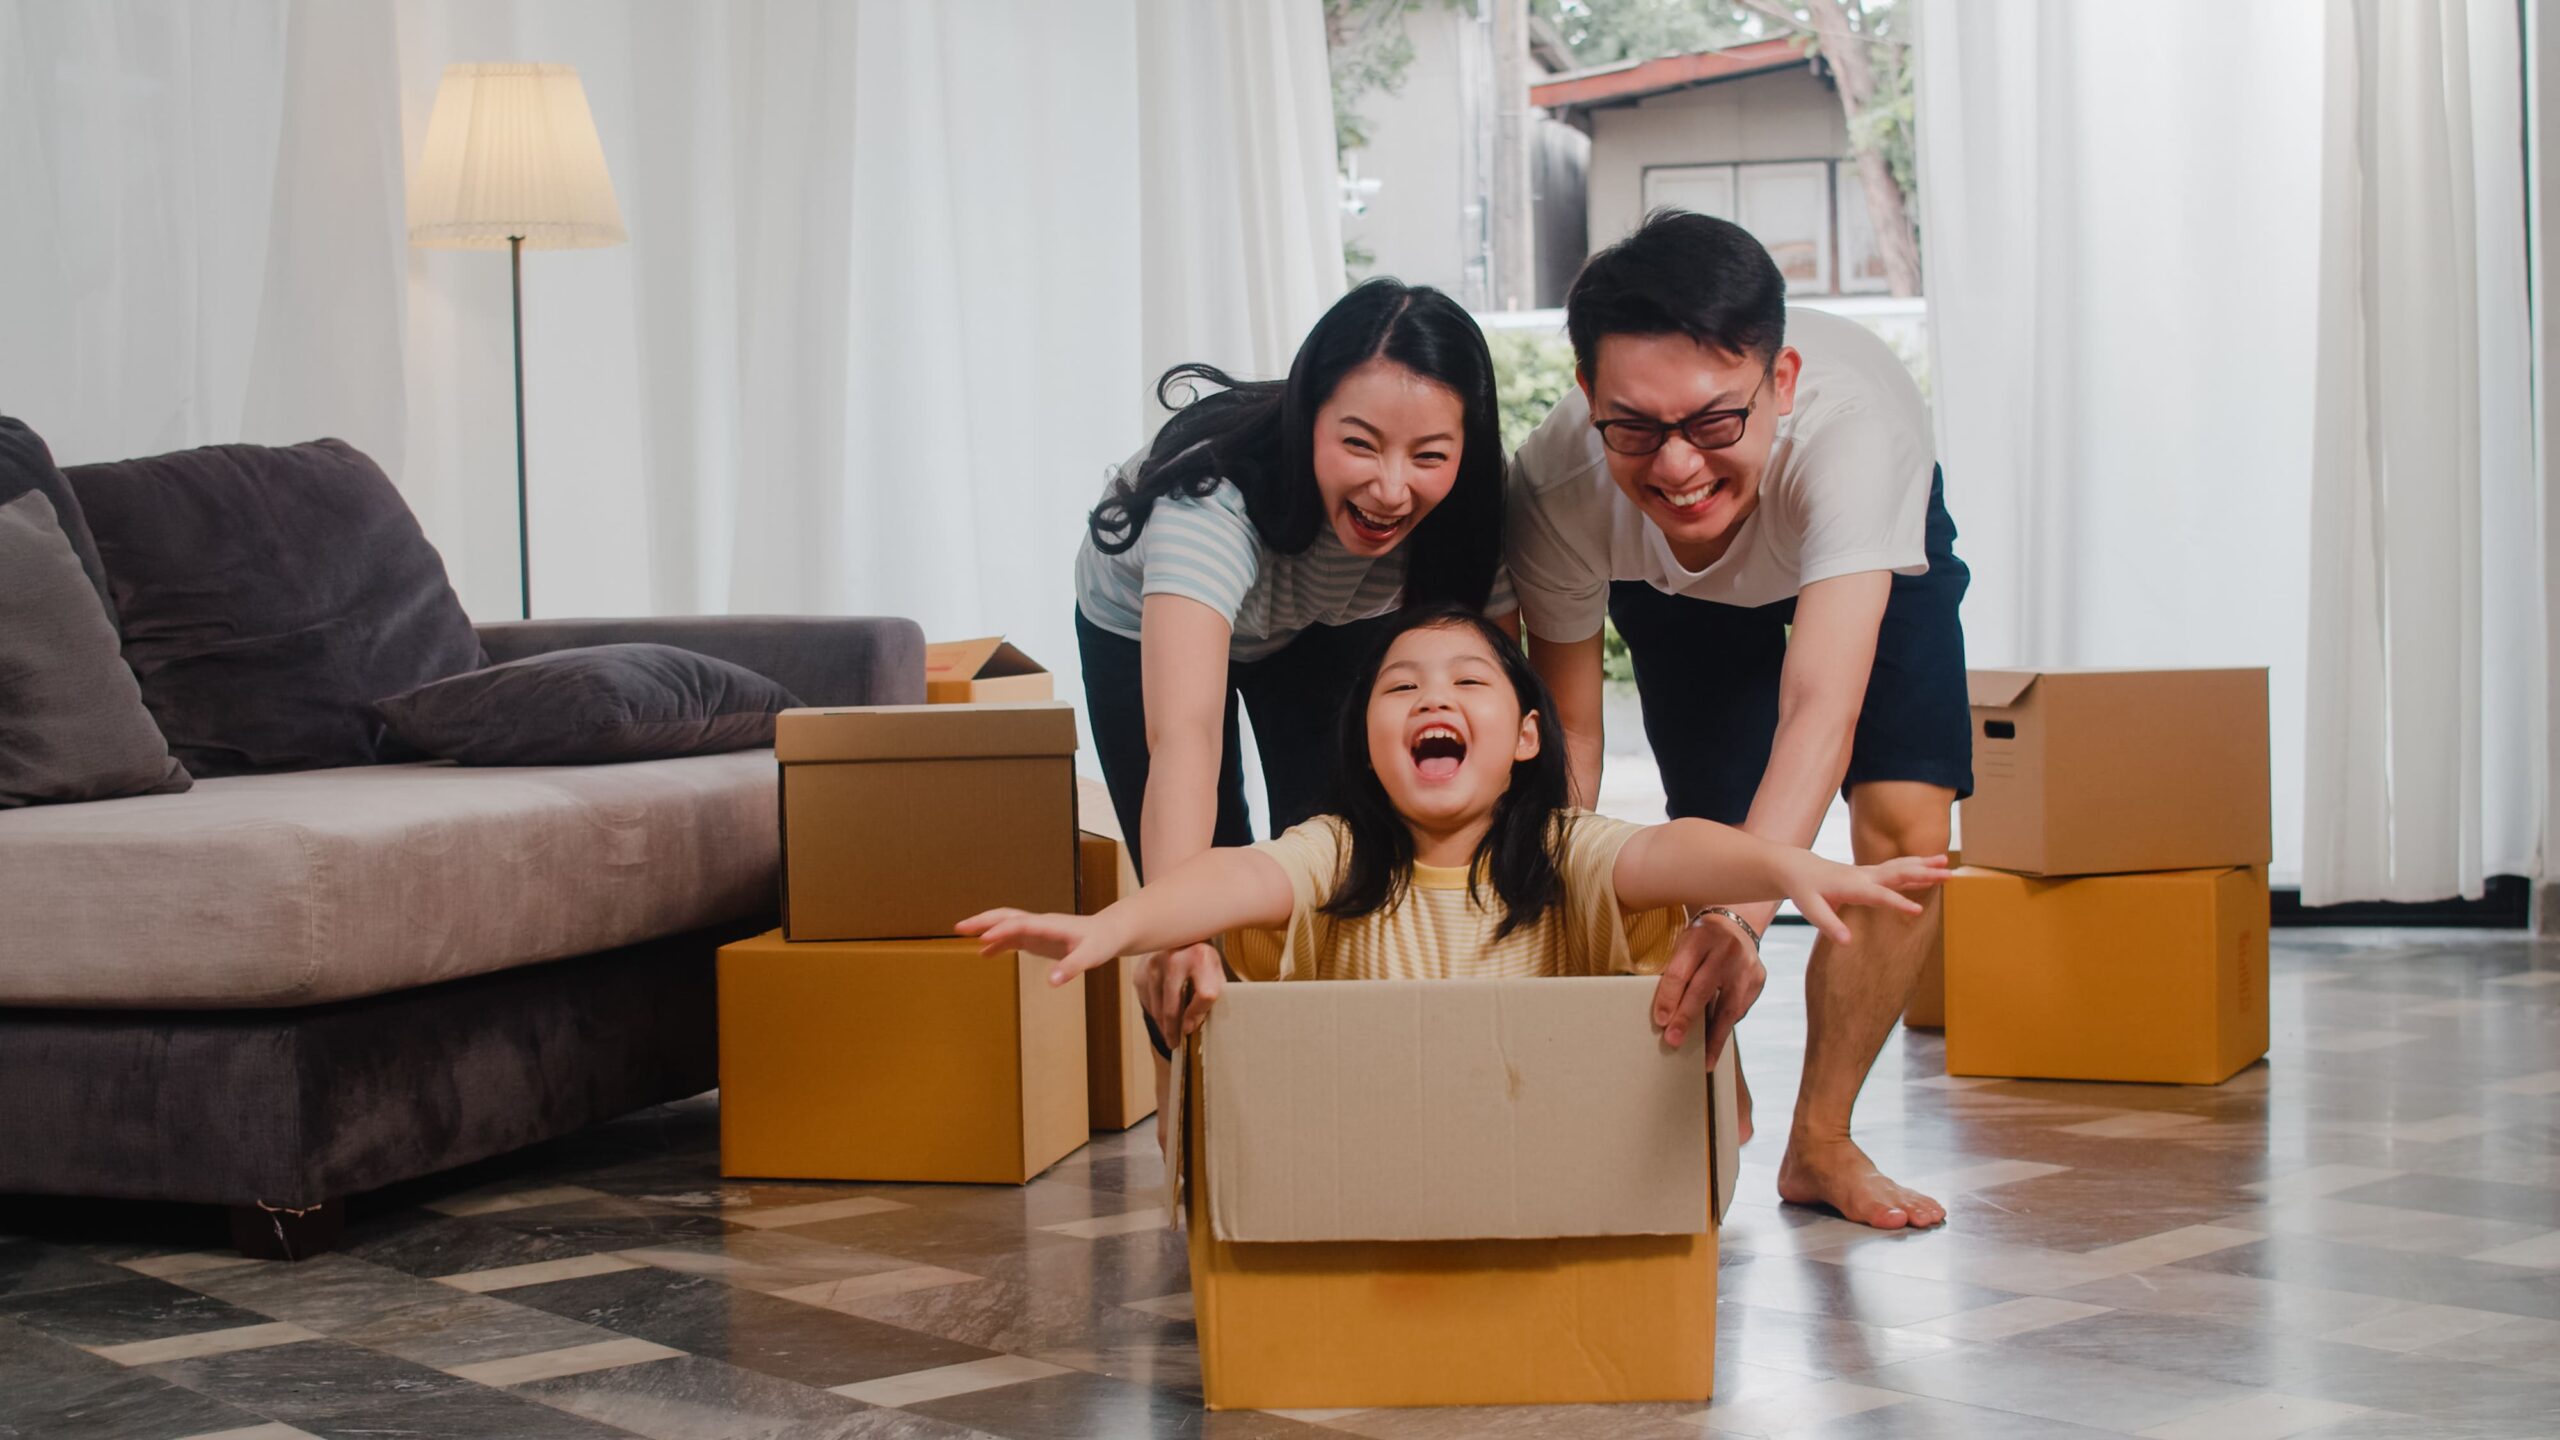 happy asian young family having fun laughing moving into new home japanese parents mother father smiling helping excited little girl riding sitting cardboard box new property relocation 1 scaled